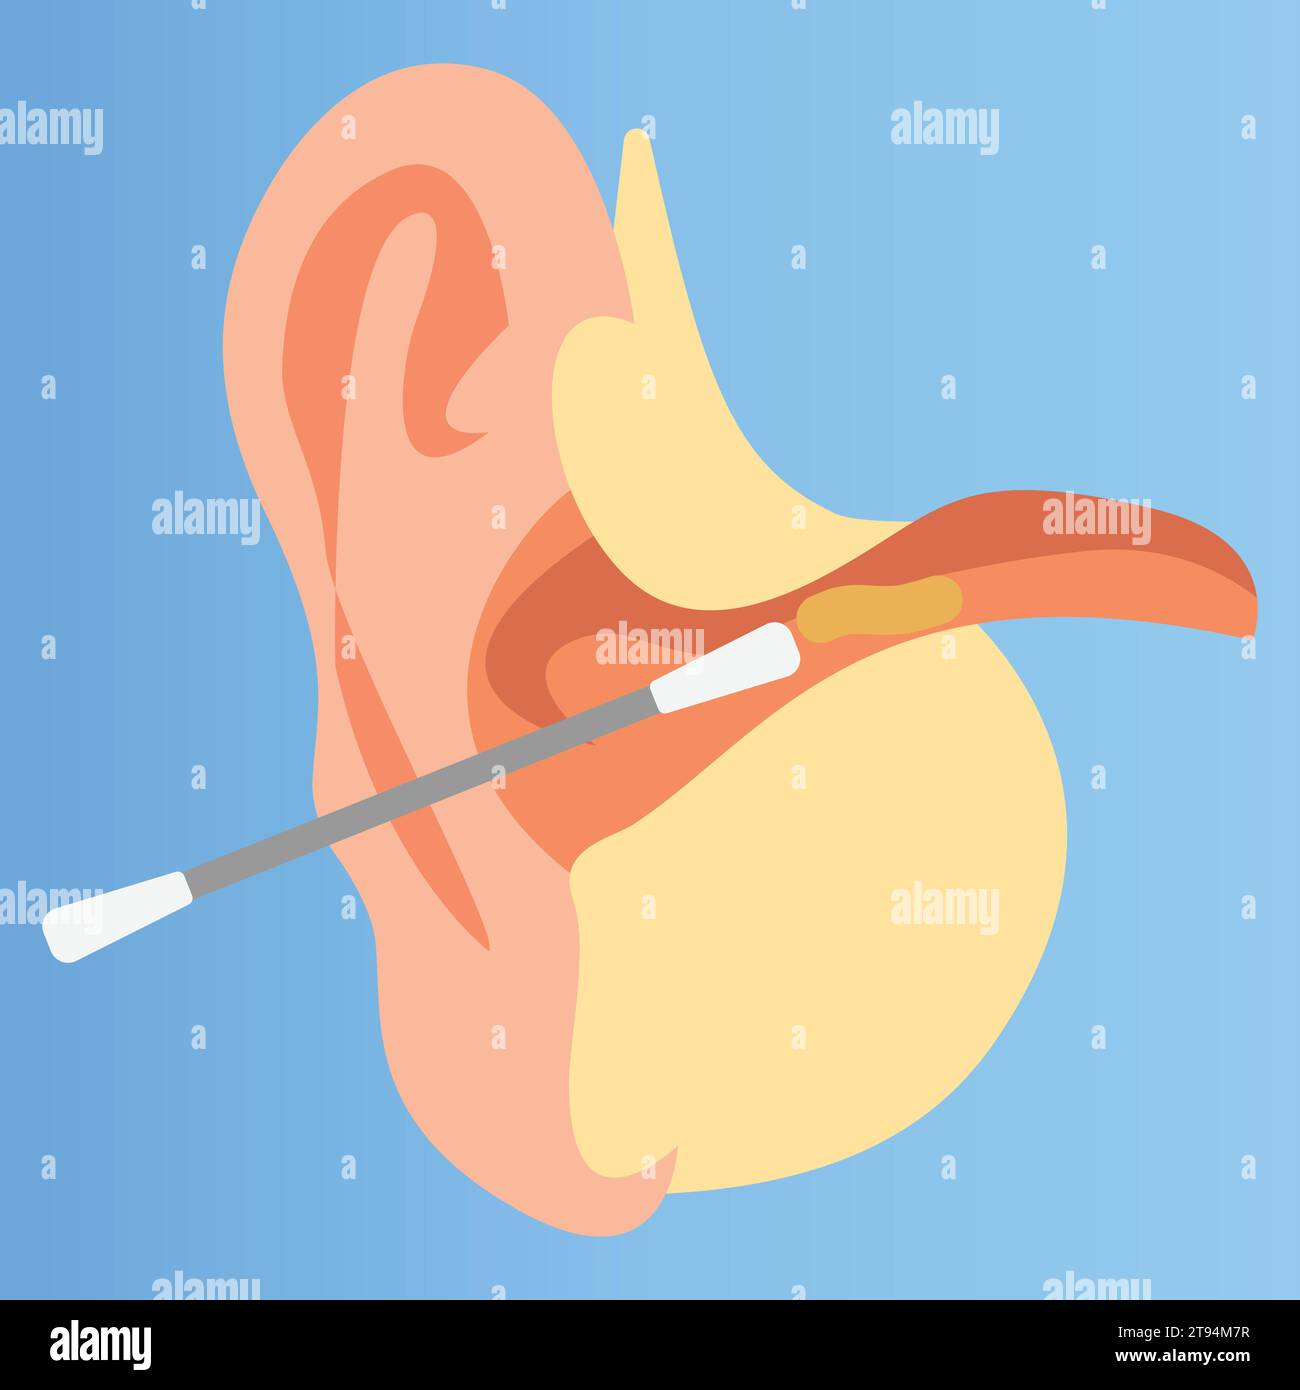 Cleaning a human ear with a cotton swab Stock Vector